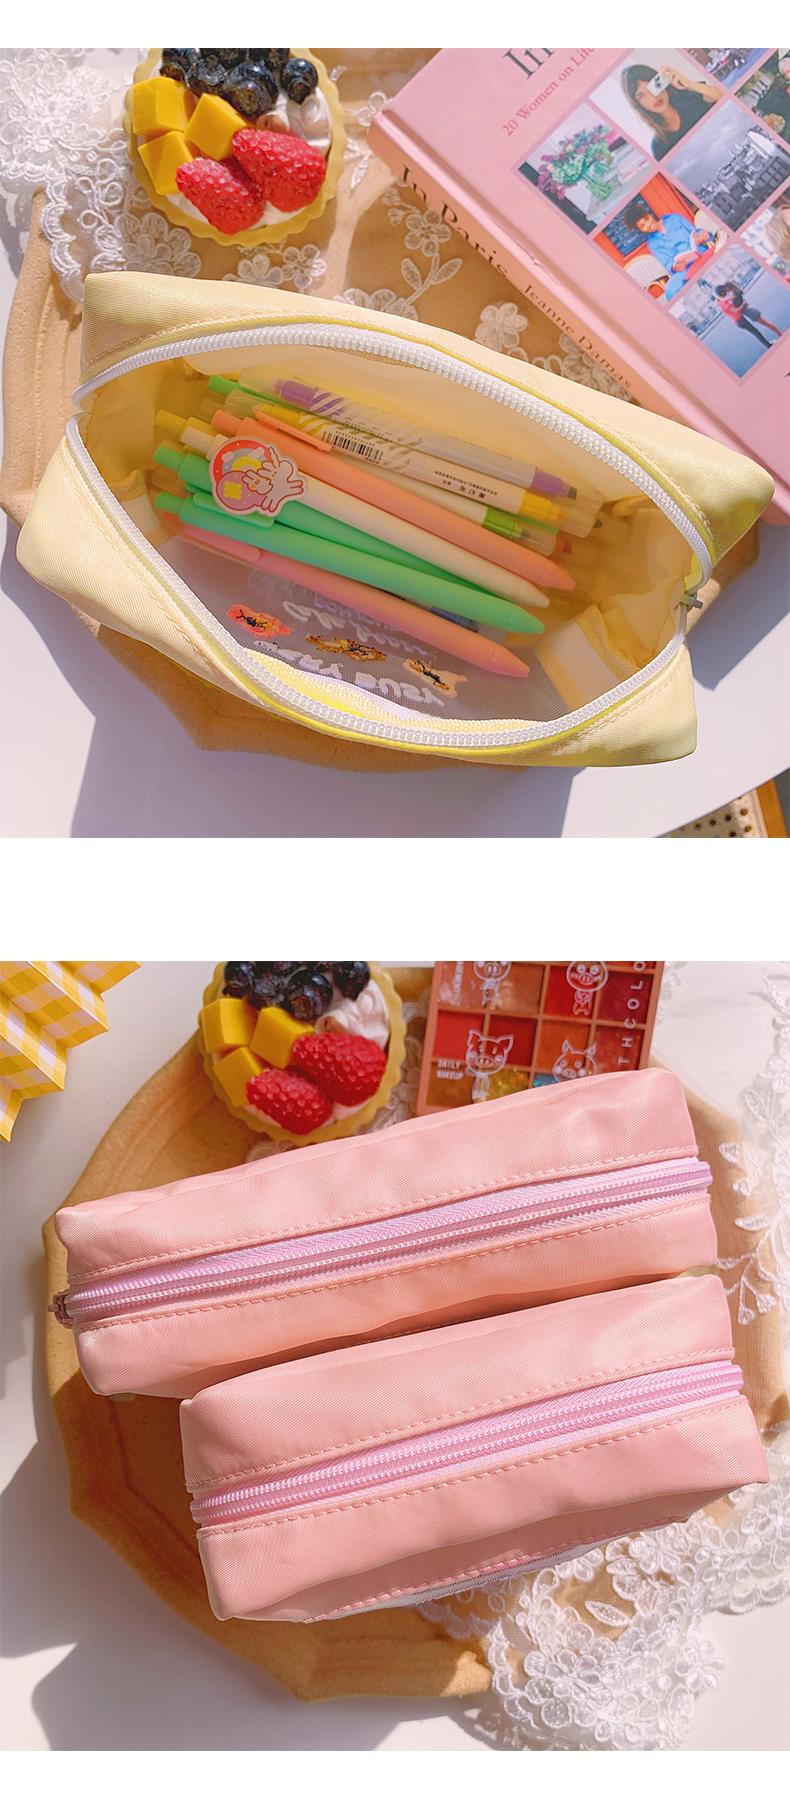 Cyflymder Cute Embroidery Pencil Case Girl Bear Large Capacity Pen Pouch Ins Kawaii Makeup Storage Bag Portable Travel Organzier